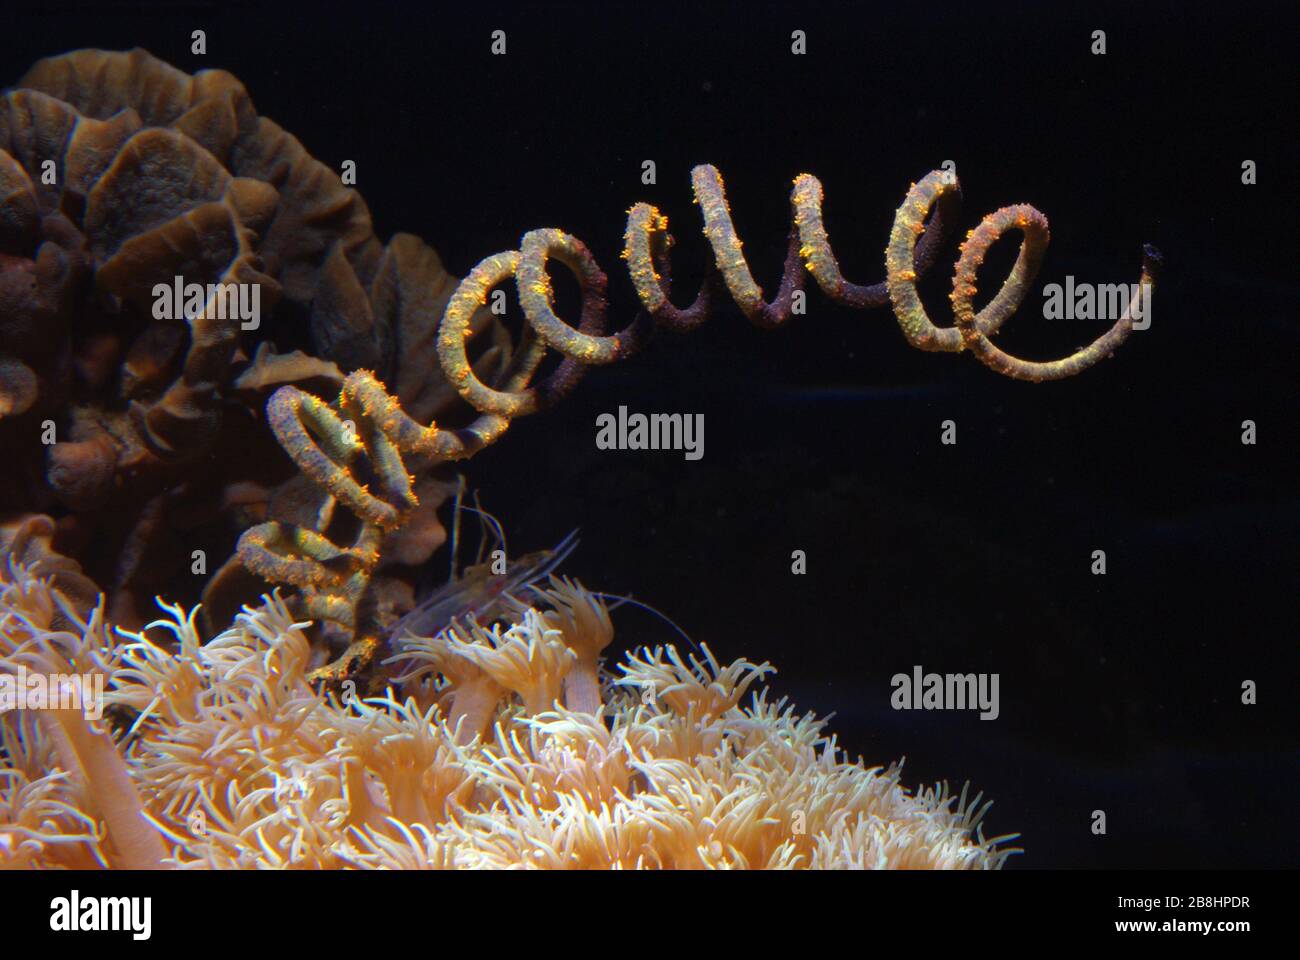 Whip or wire coral, Cirrhipates sp. Stock Photo